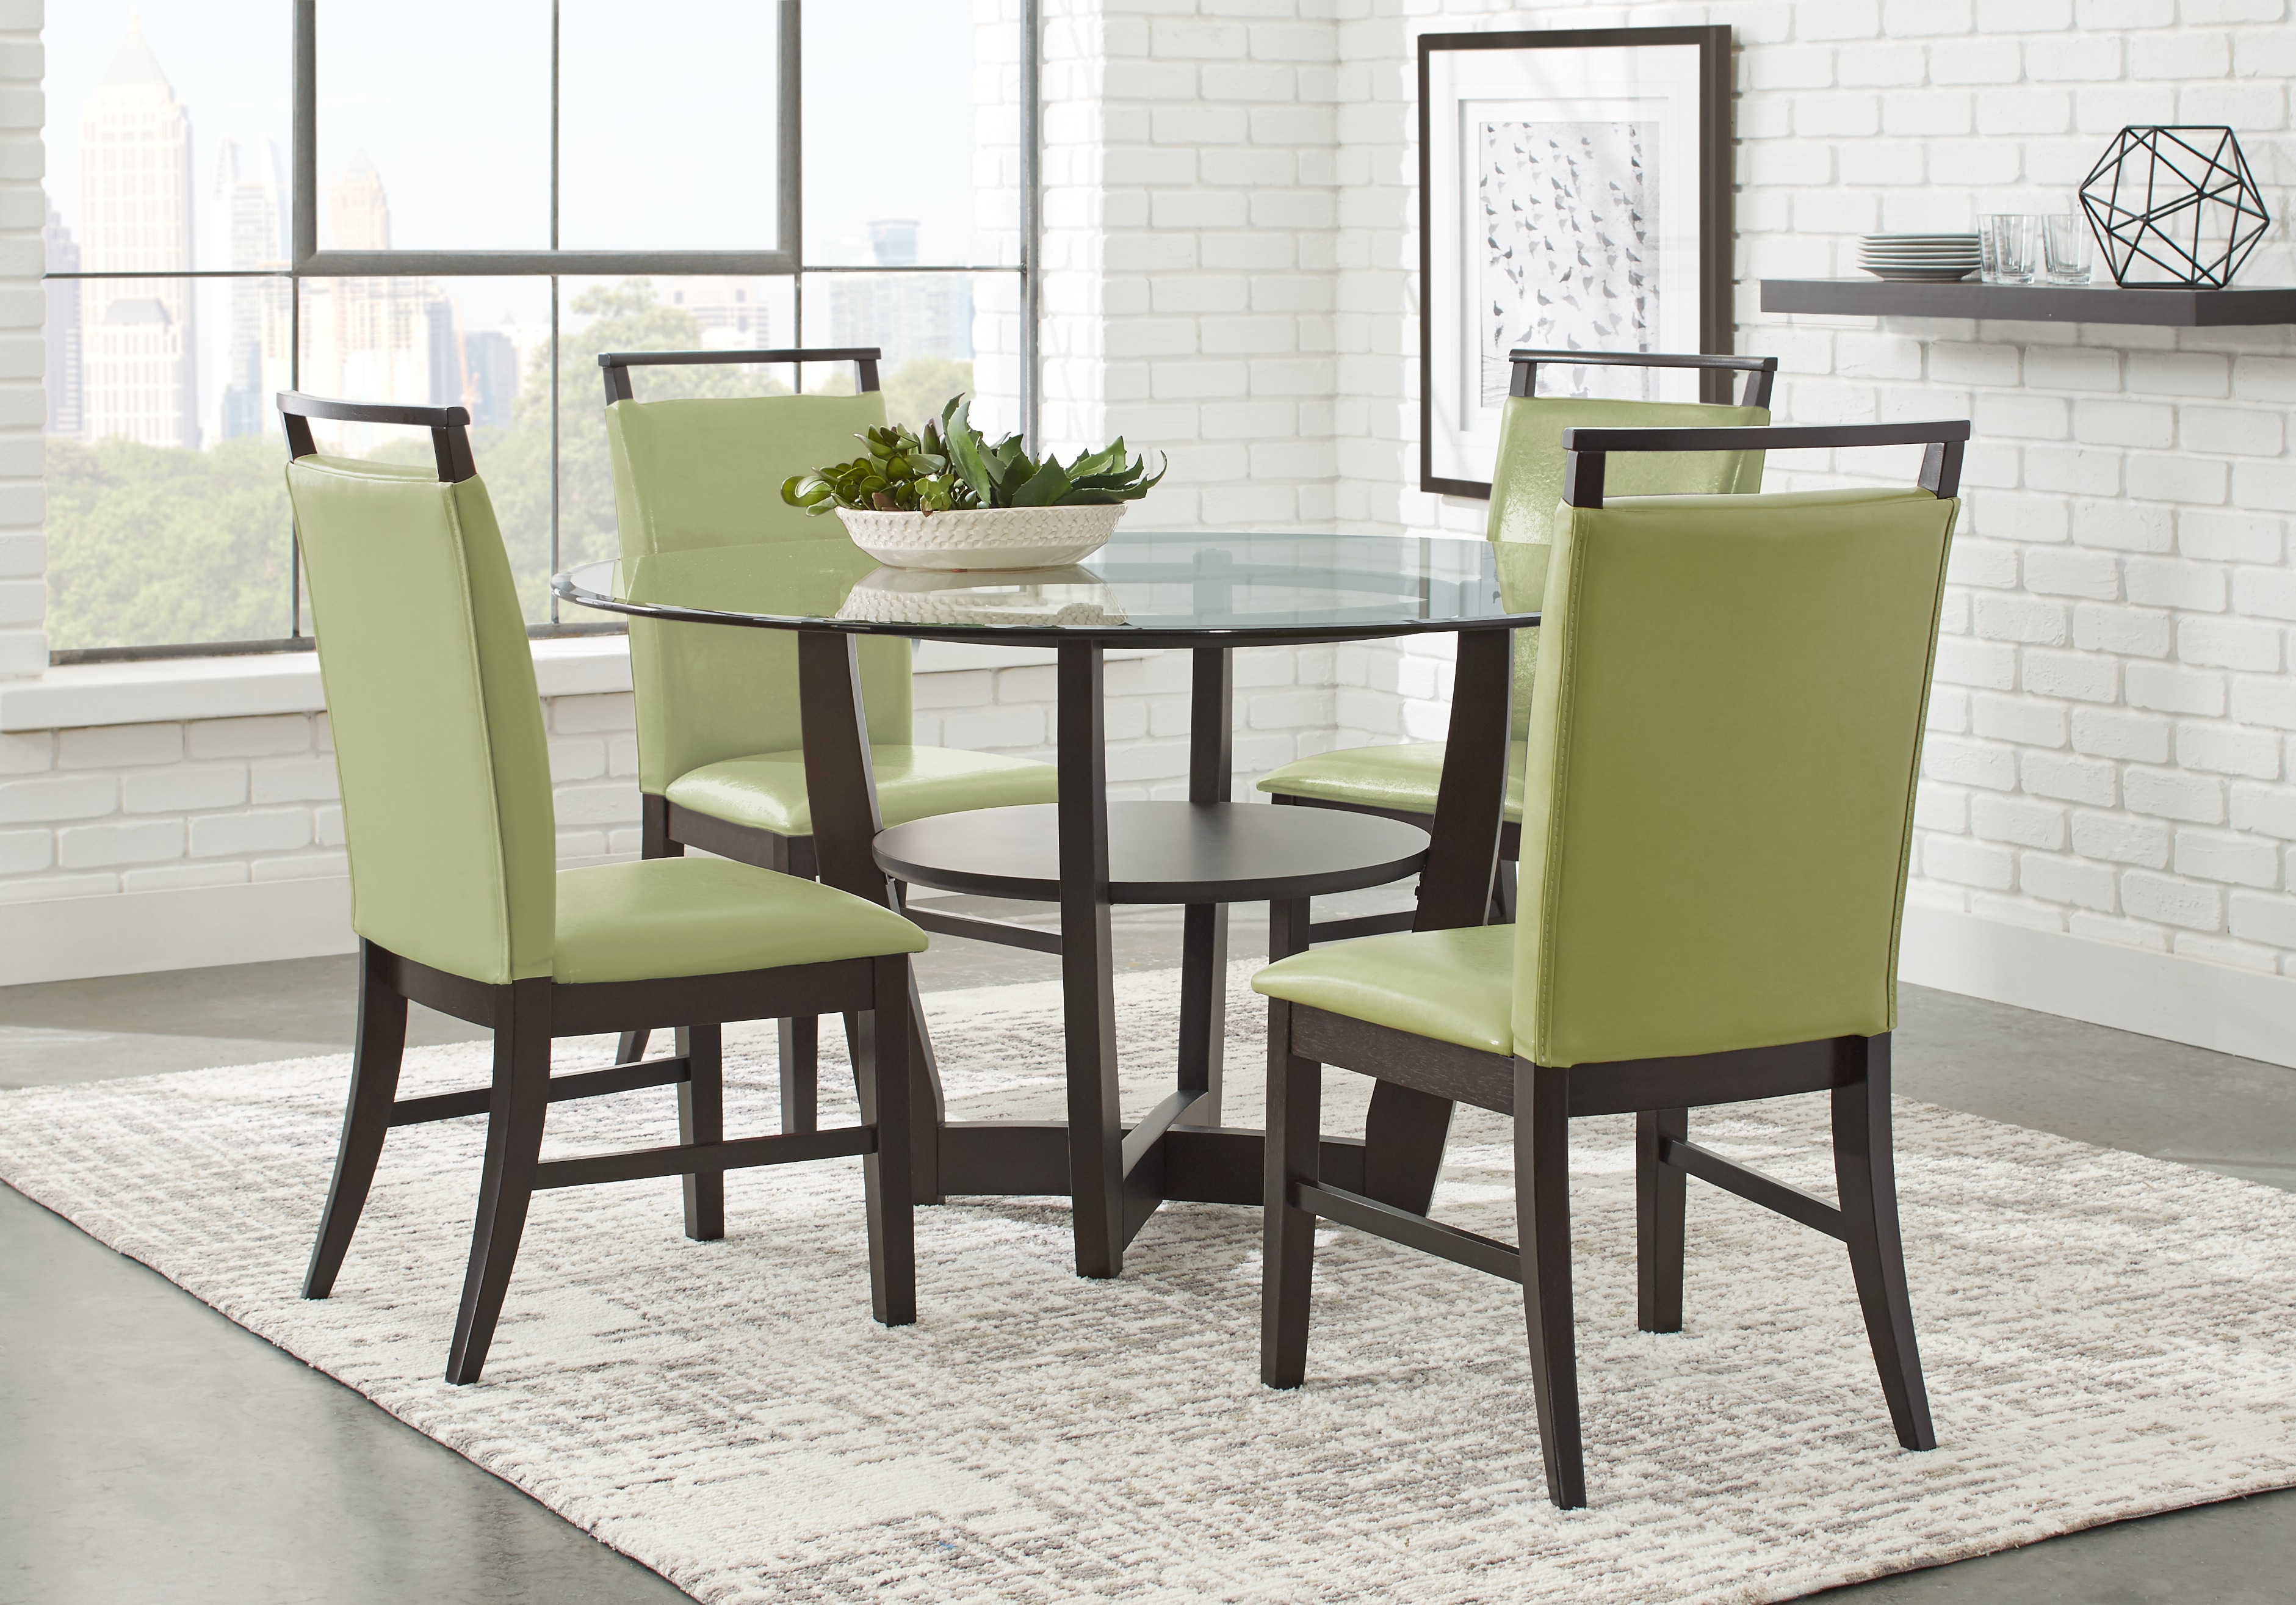 ciara espresso round dining set room sets dark wood green accent table butler specialty company outdoor patio lights furniture fargo center decor tables pub counter height chairs